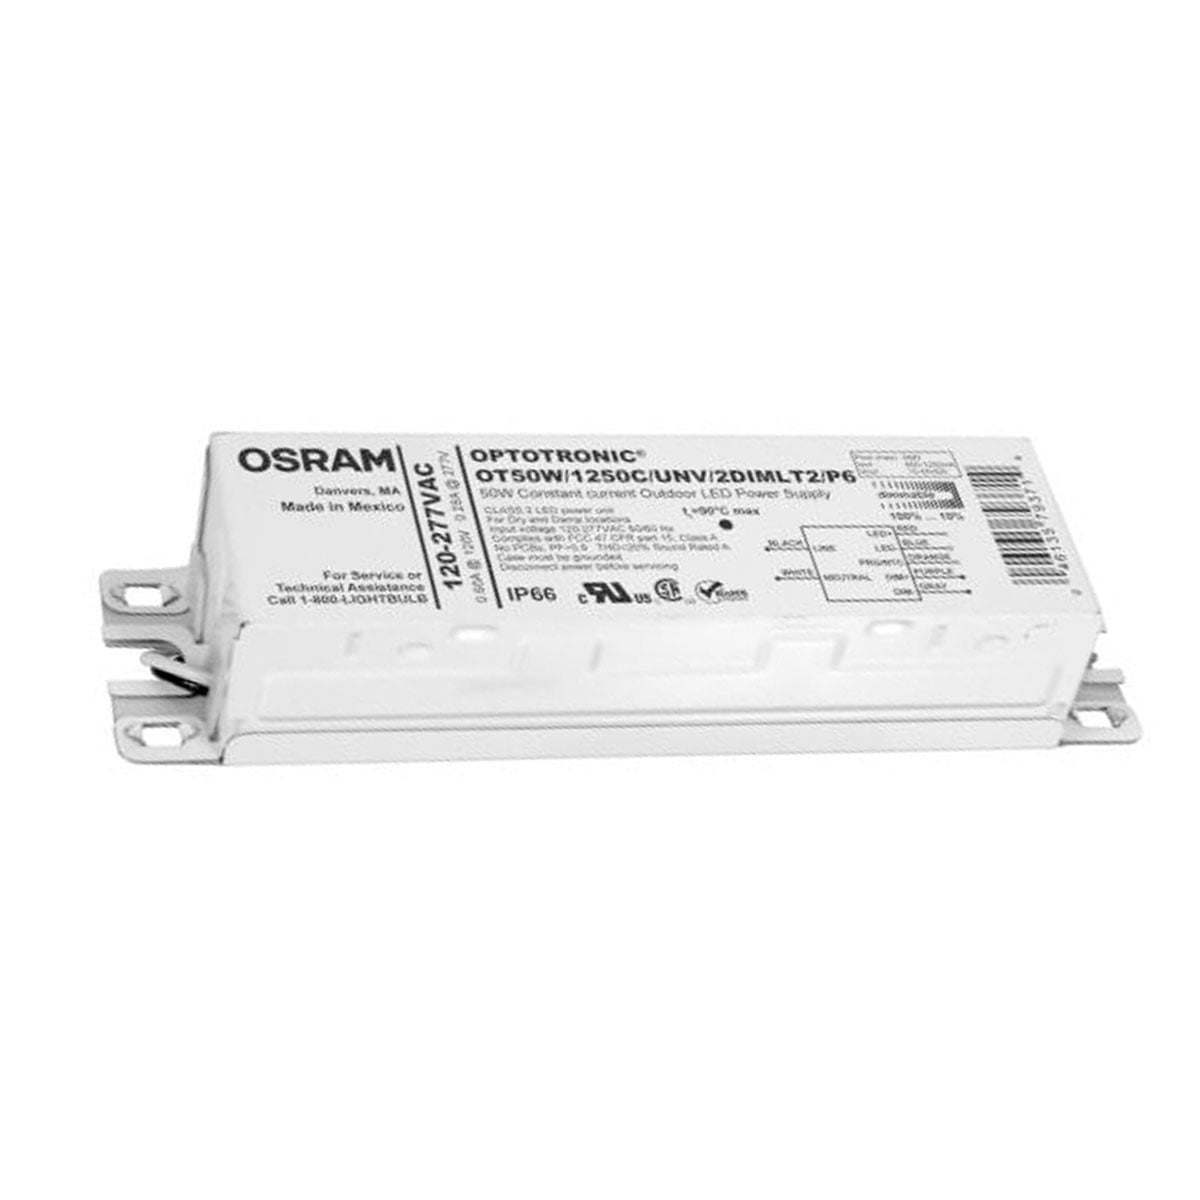 Optotronic Intelligent, 50W, 1000-2100mA Programmable Outdoor LED Driver, 0-10V Dimming, 120-277V Input